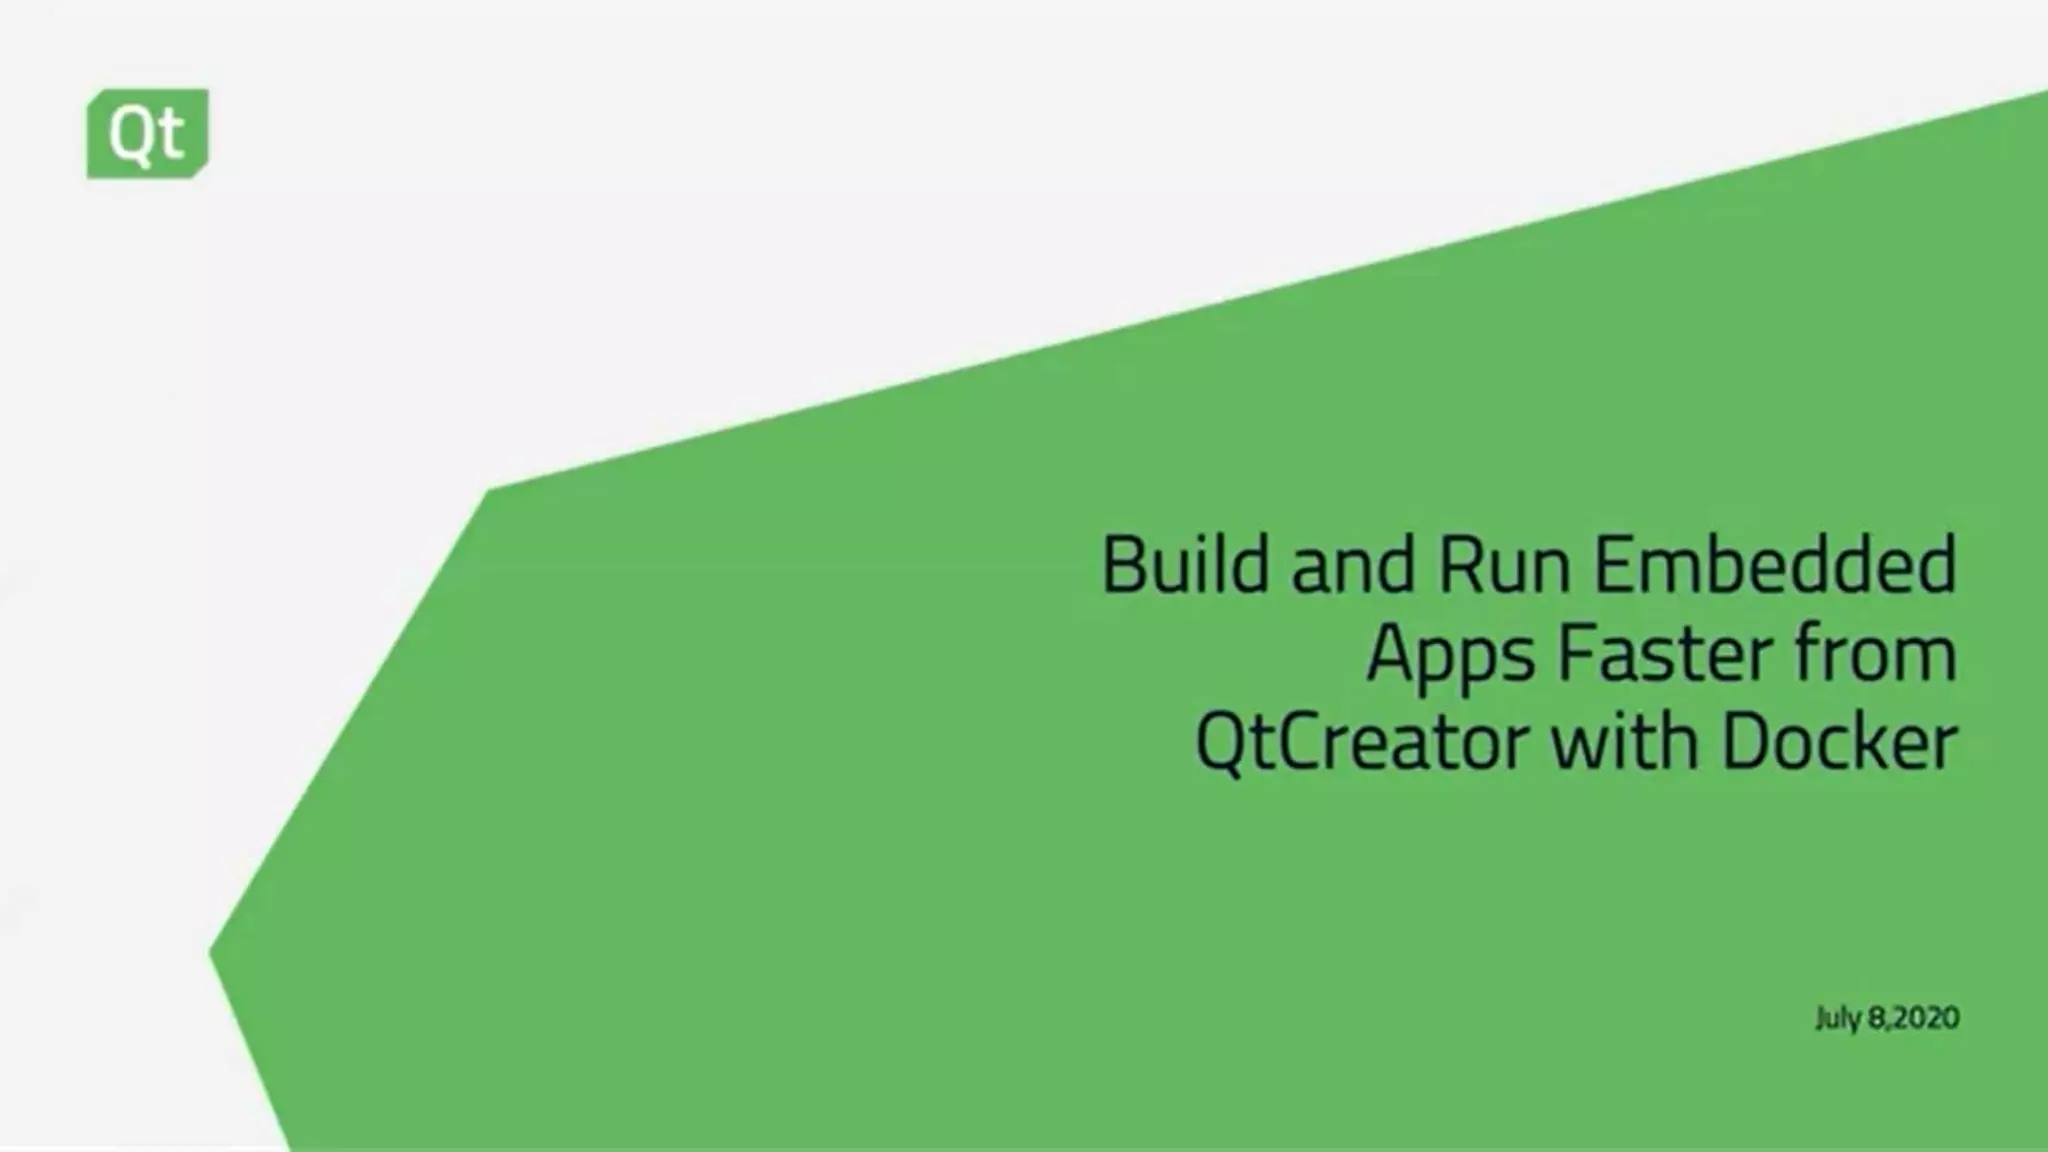 Build and run embedded apps faster from qt creator with docker